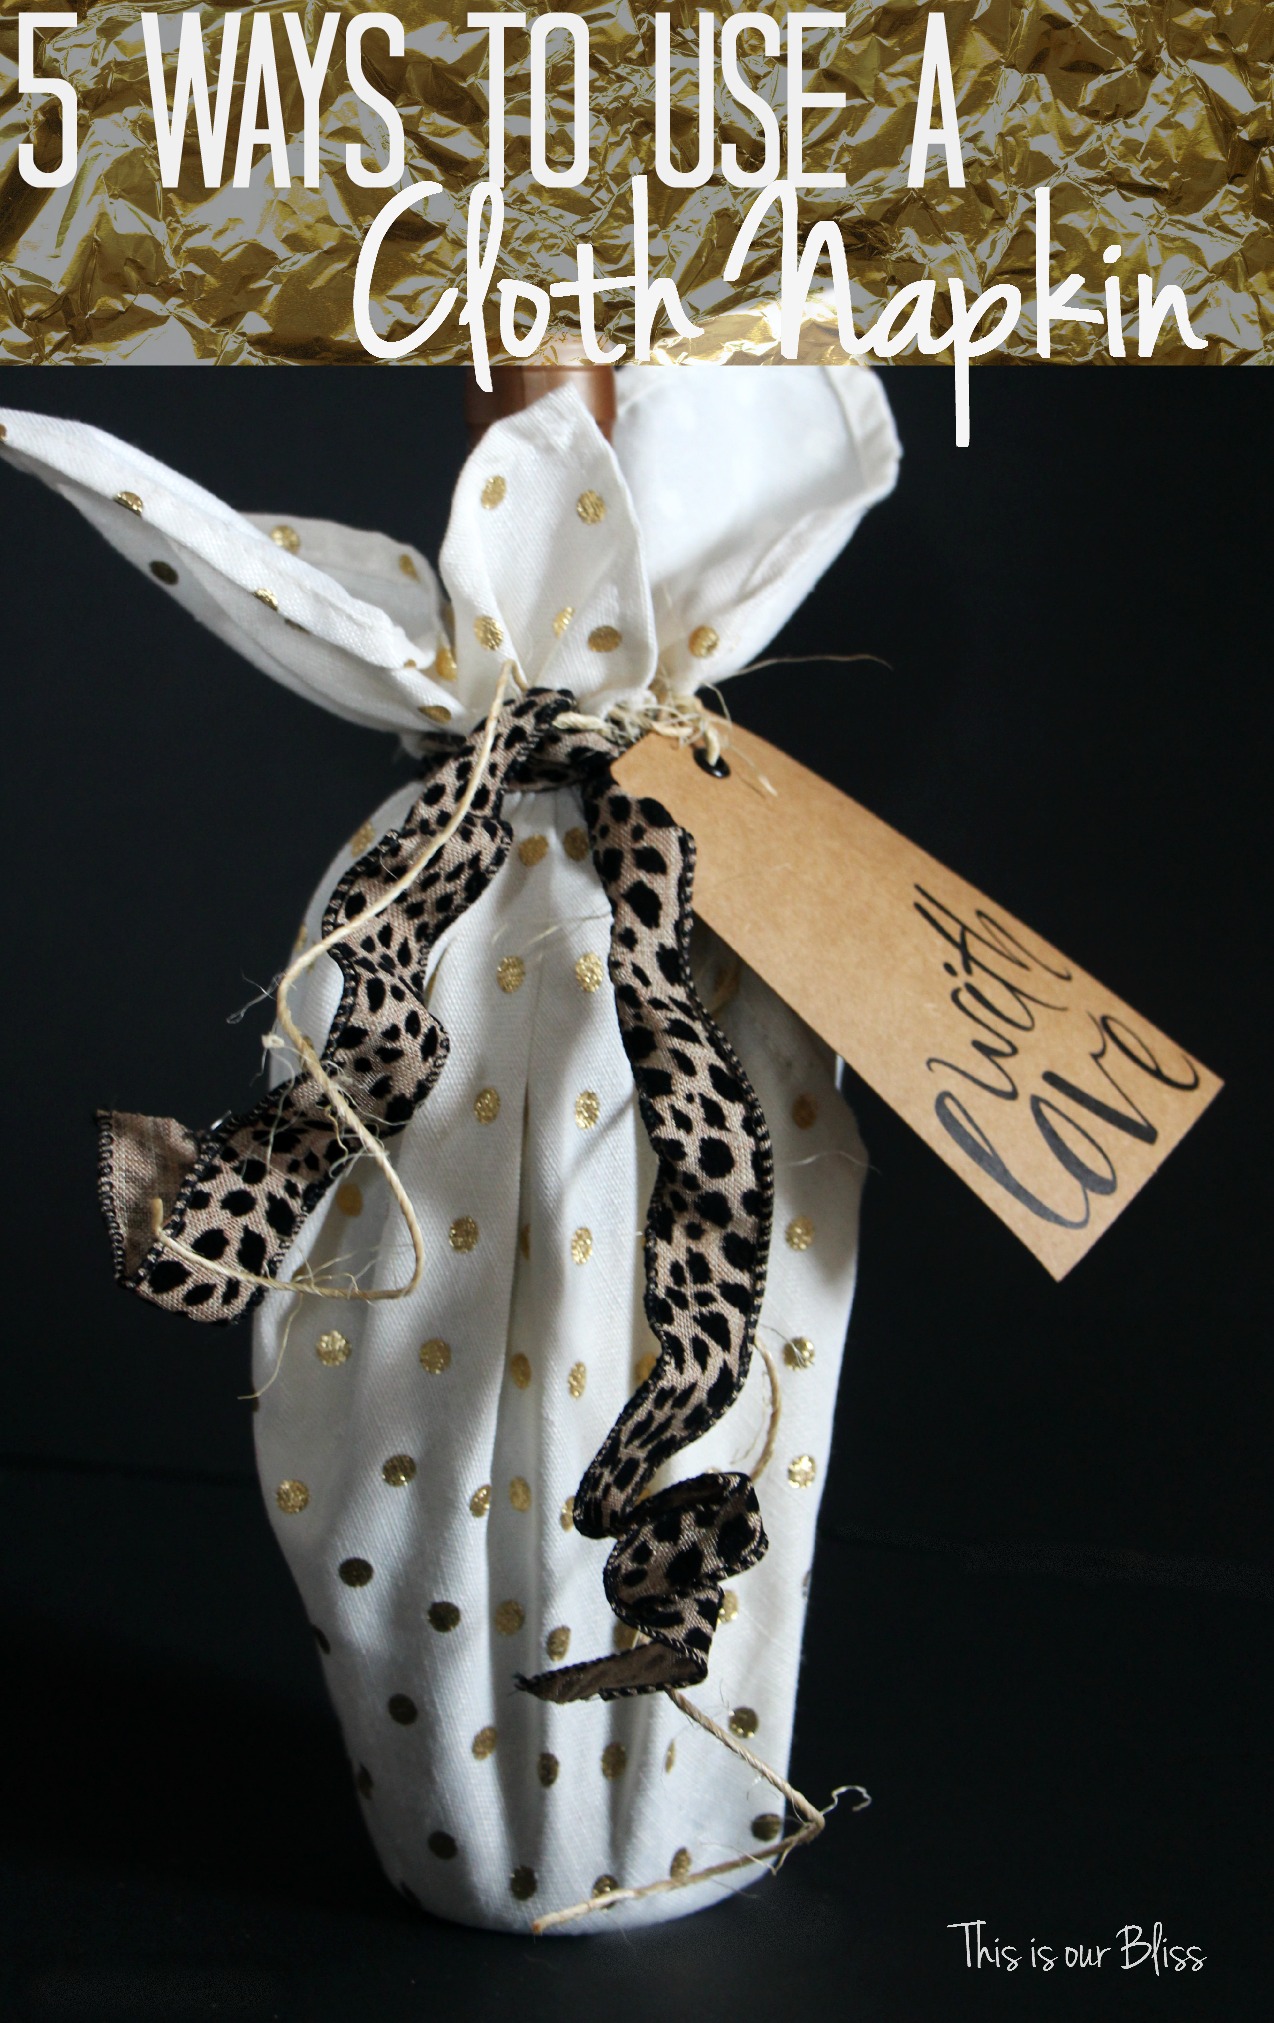 cloth napkin as gift wrap - how to use cloth napkins - 5 ways to use cloth napkins - gold foil napkins - leopard gold - This is our Bliss